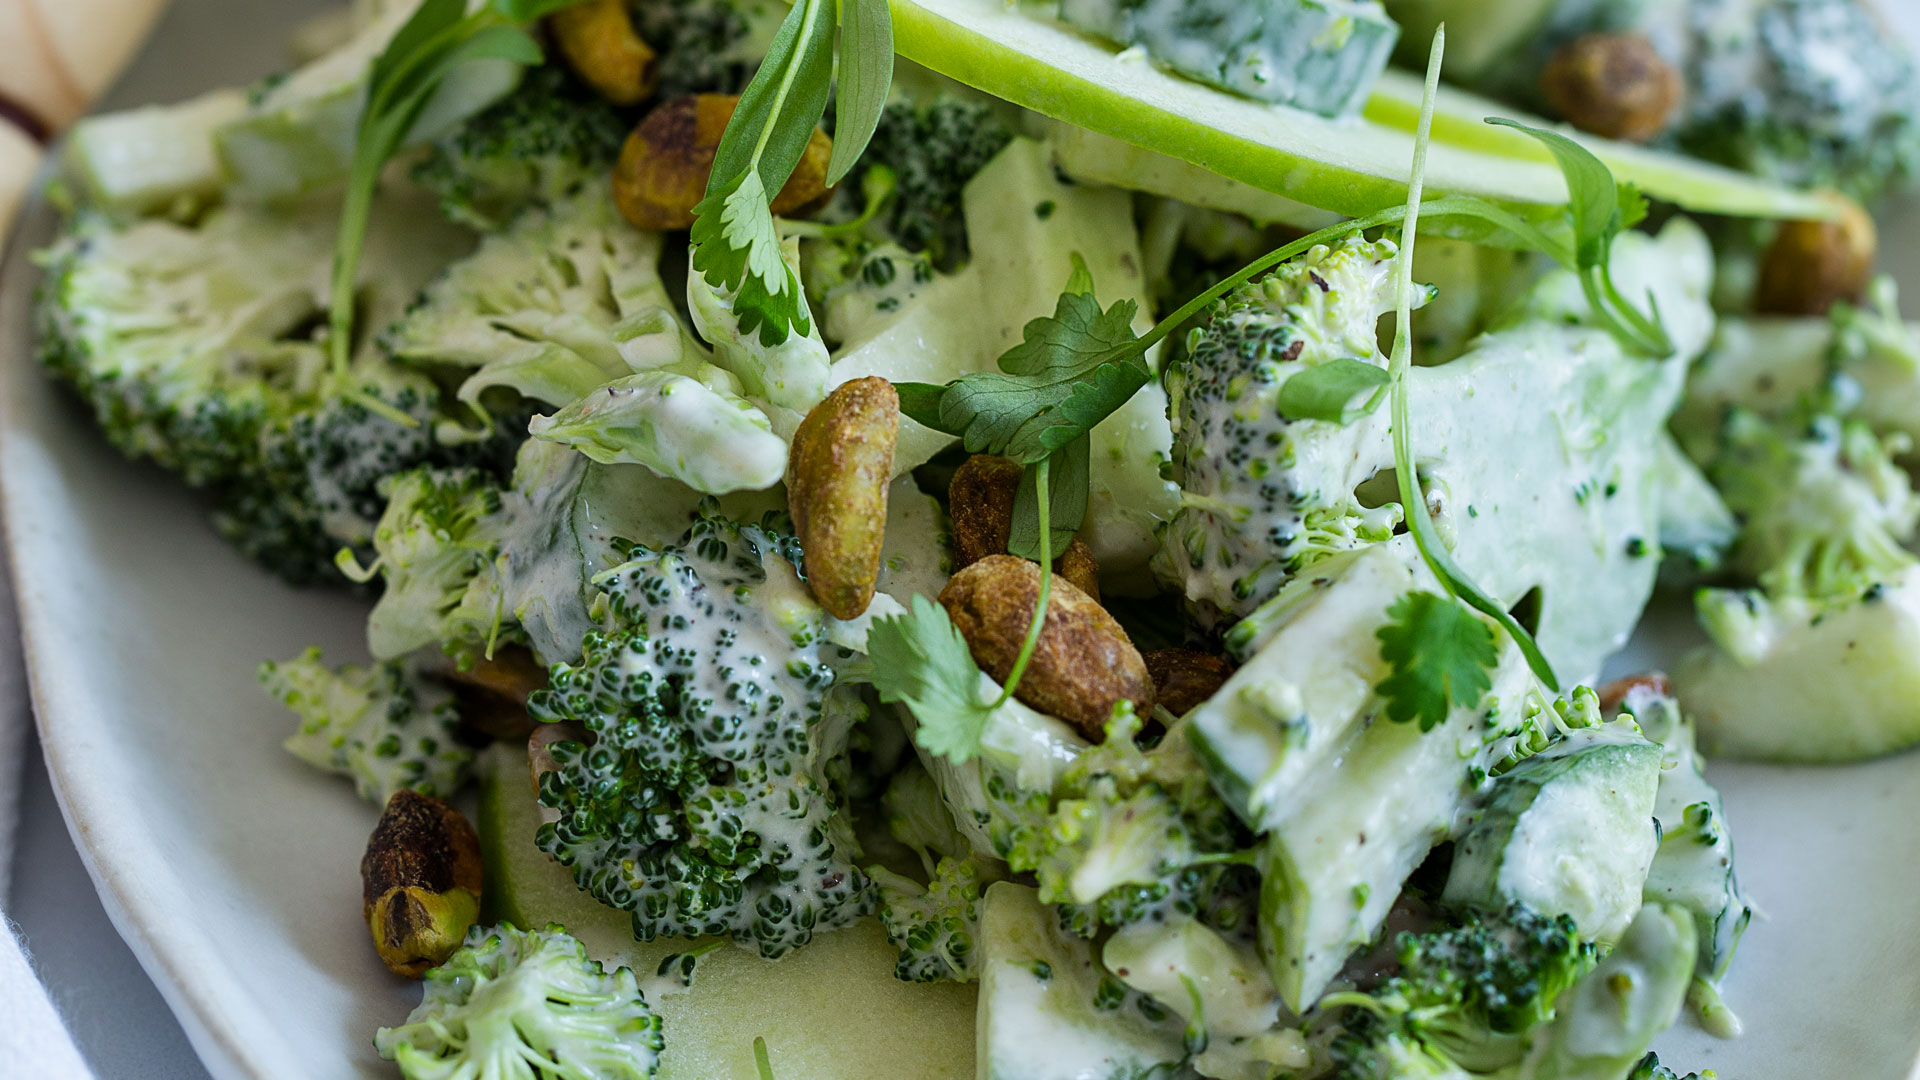 Apple and Broccoli Slaw with Pistachios and Tahini Dressing